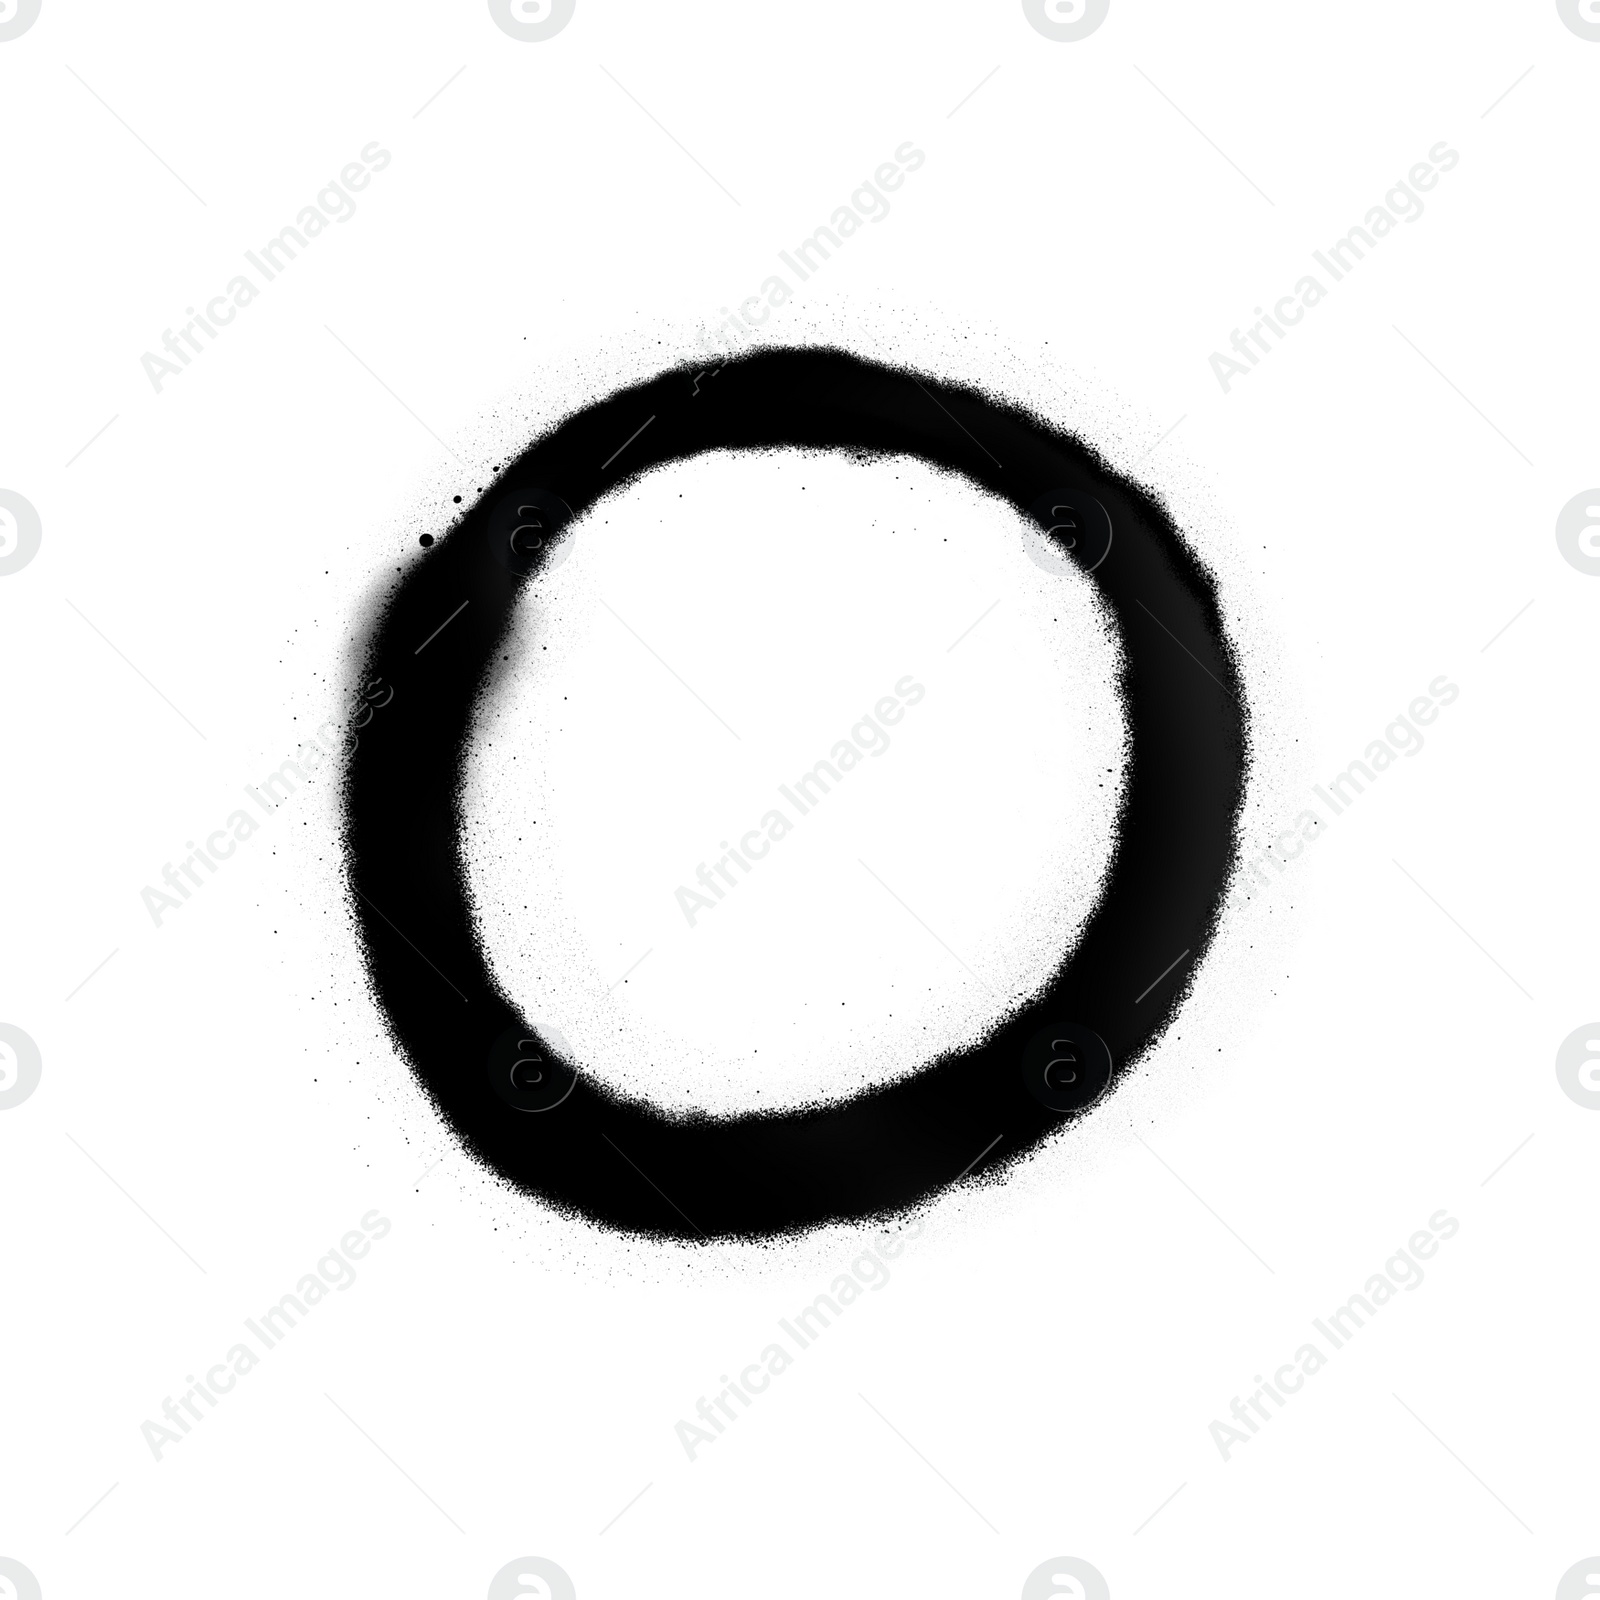 Illustration of Circle drawn by black spray paint on white background